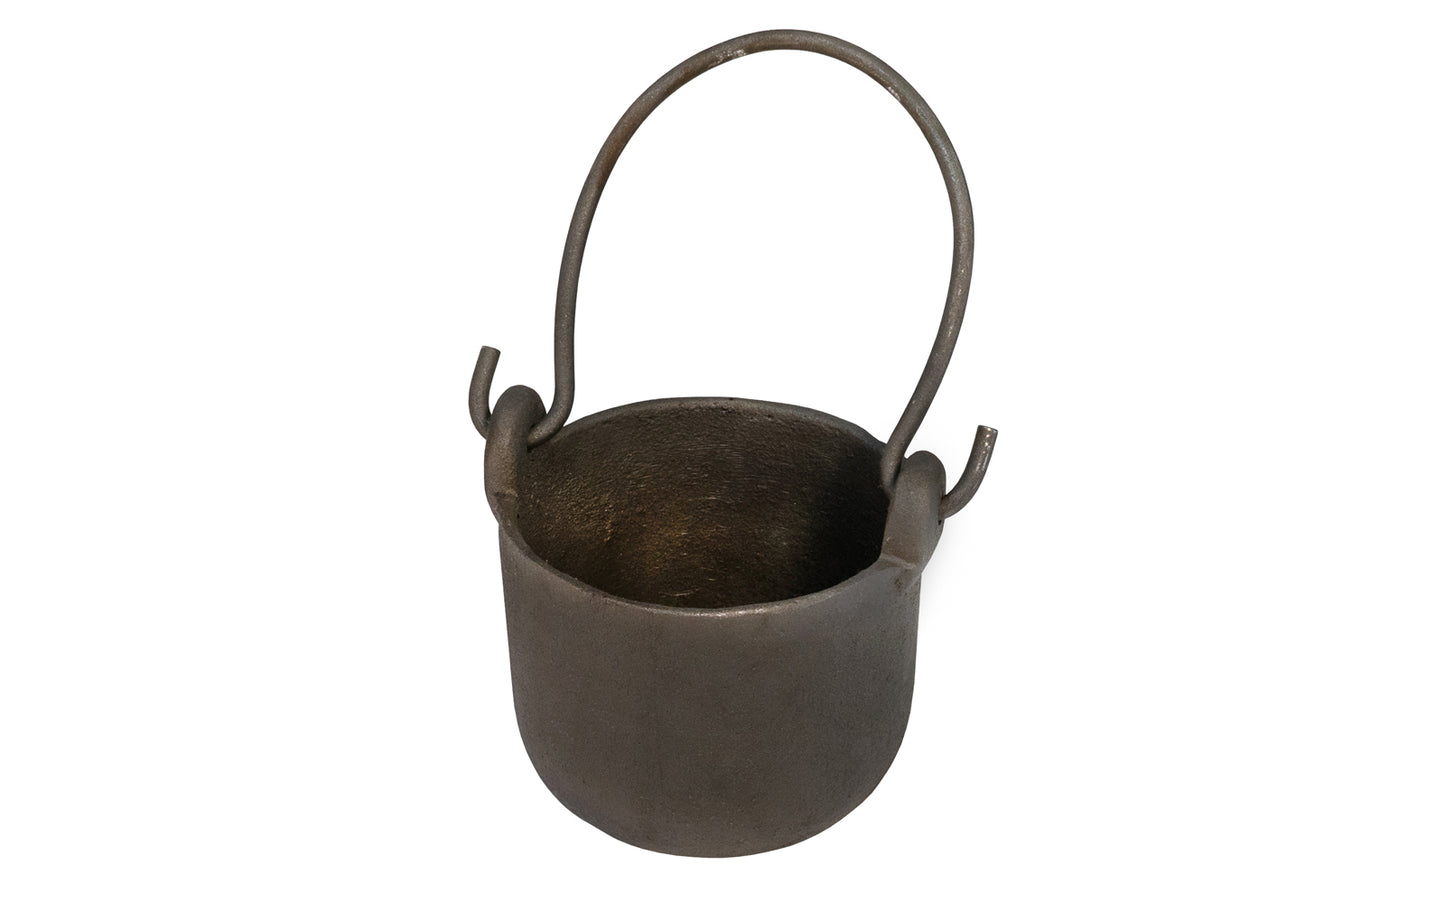 A tough & hefty USA-made soldering pot made by C.S. Osborne. Made of cast iron material with a handle. Heavy quality for long use. 2 lbs 3 oz. total weight.   Made in the USA - CS Osborne Solder Pot - 4" Outside Diameter - 3" Depth of Bowl - Heavy Cast Iron Bowl - 4" O.D. - Model No. 398-4 - Soldering Bowl with handle - 096685618312